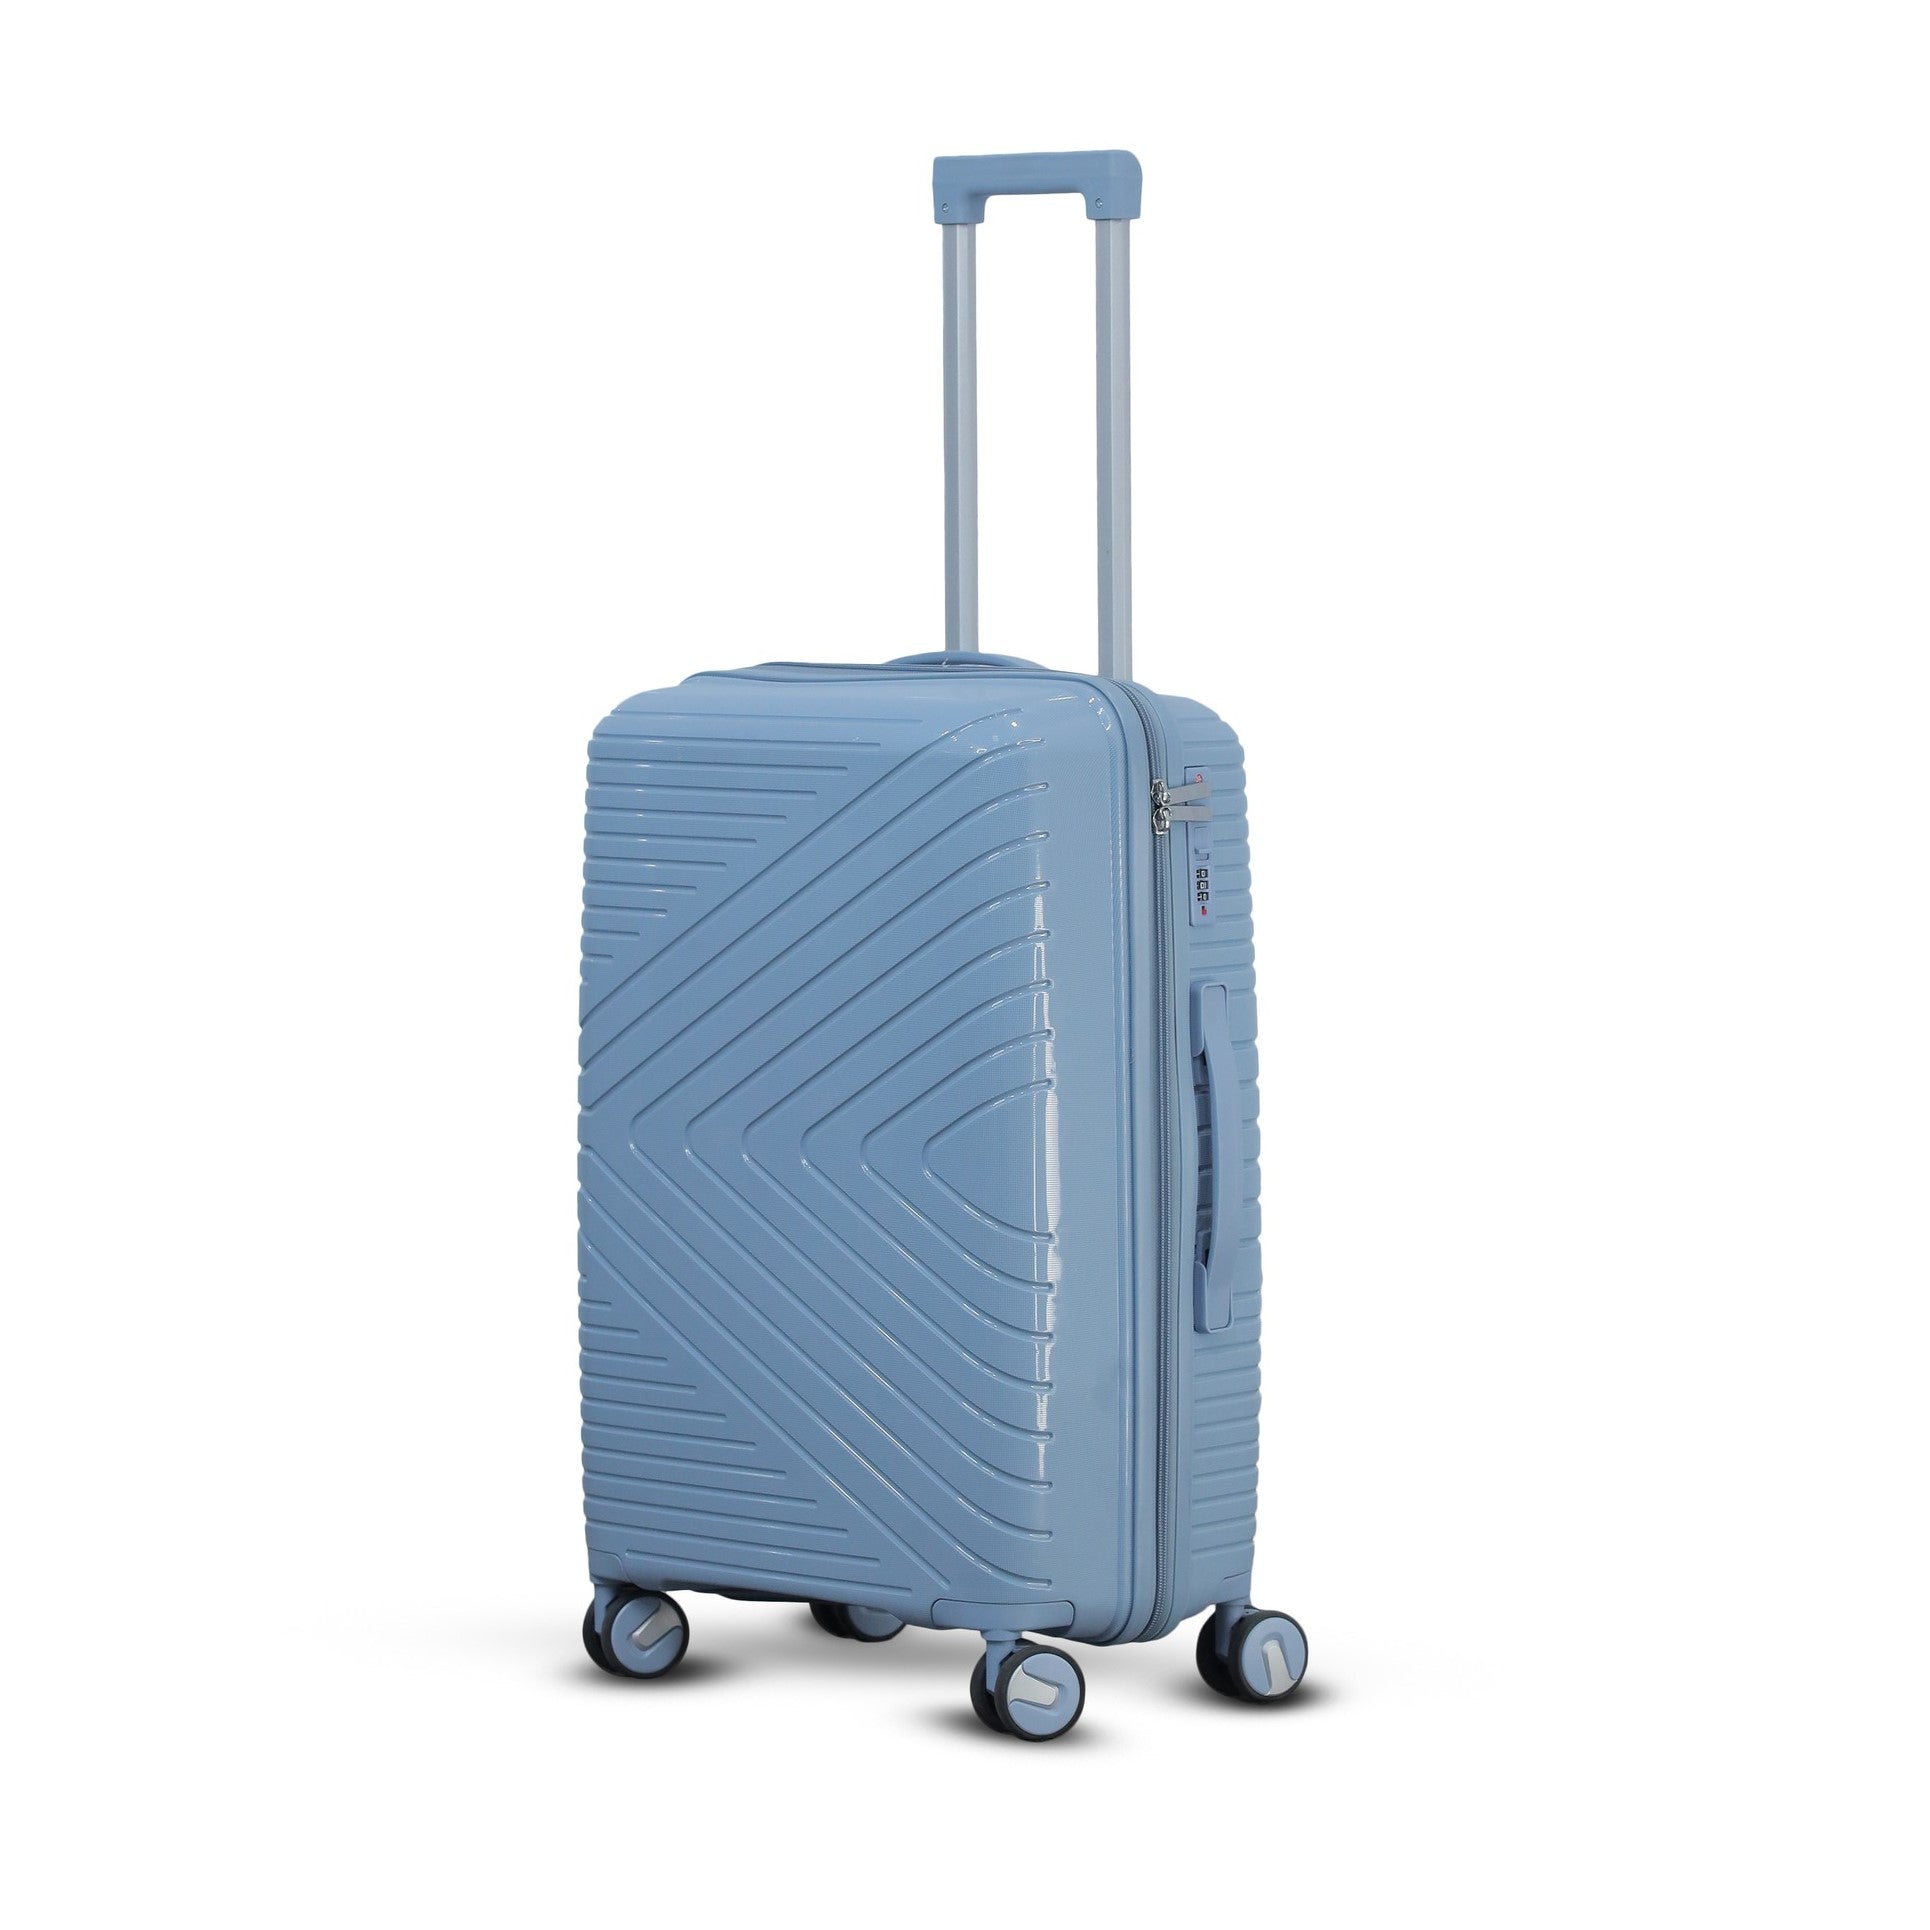 Buy 1 Get 1 Free | Medium Size PP Unbreakable Luggage Bags | 24" Size 20-25 Kg Capacity Zaappy